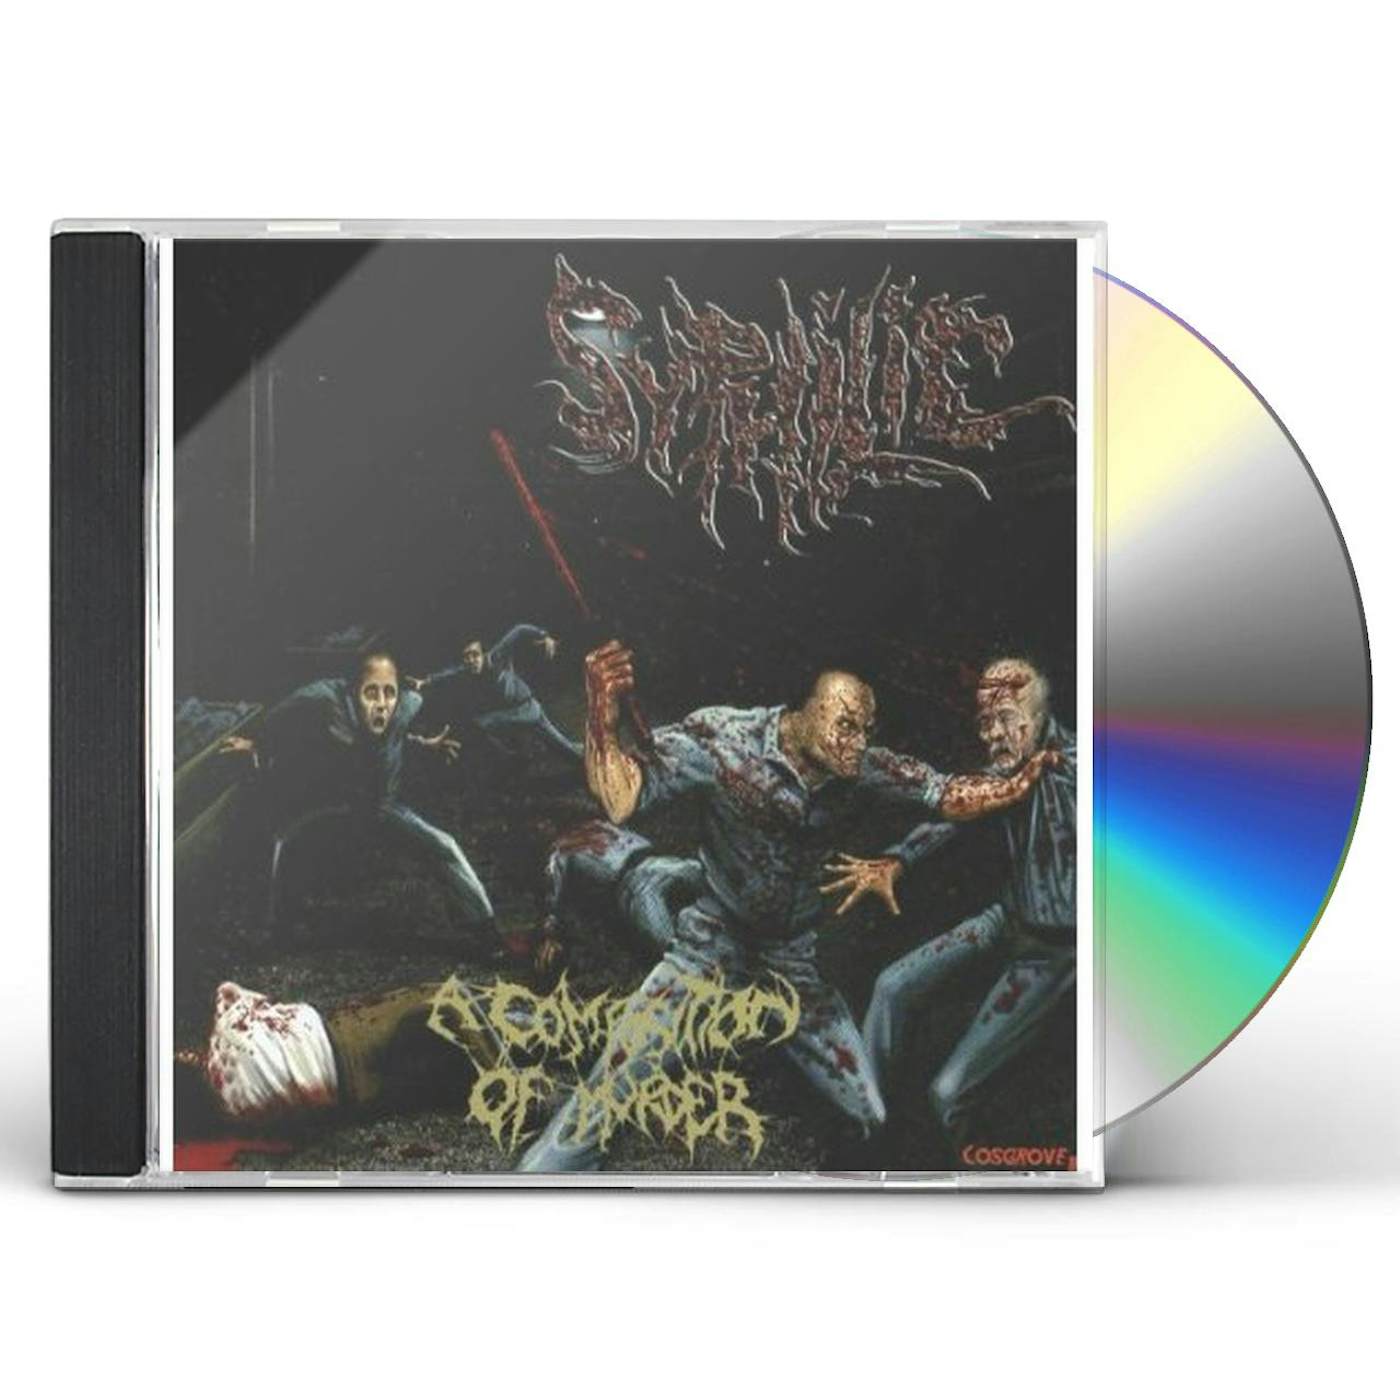 Syphilic COMPOSITION OF MURDER CD